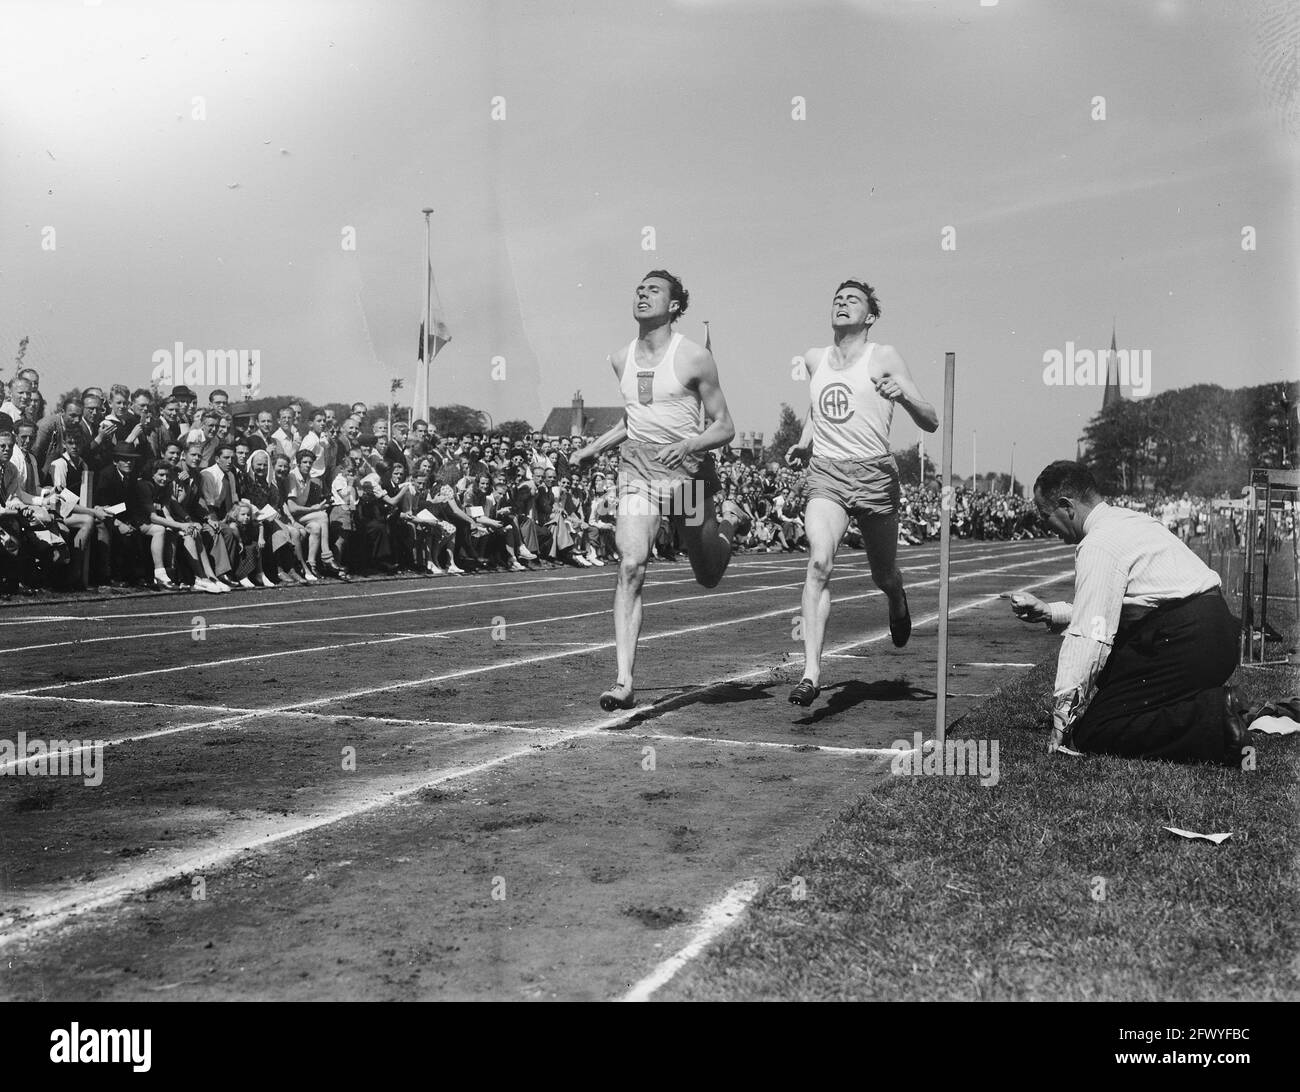 Athletics contests at the Werve in Rijswijk; running men, July 25, 1948, athletics, sports, The Netherlands, 20th century press agency photo, news to remember, documentary, historic photography 1945-1990, visual stories, human history of the Twentieth Century, capturing moments in time Stock Photo